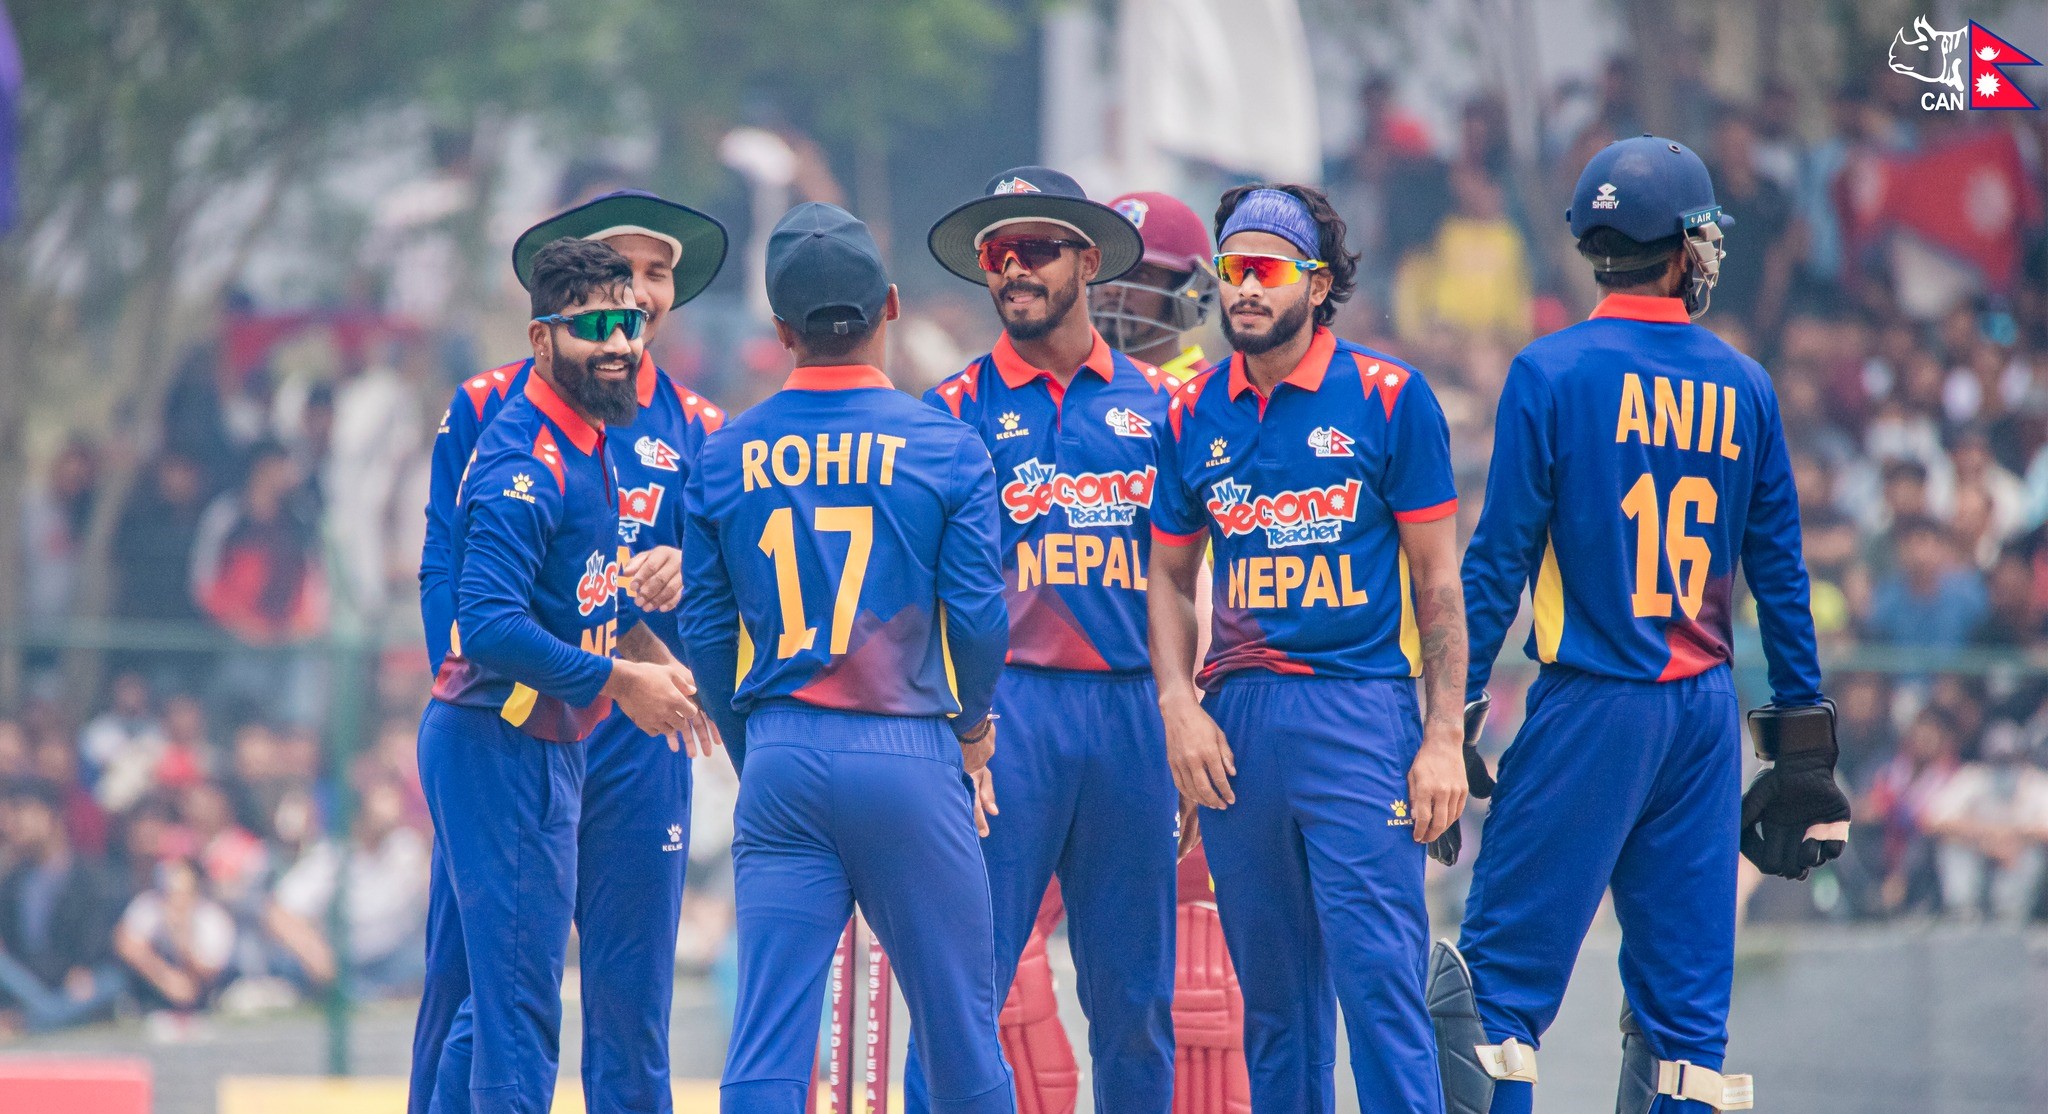 Nepal elects to bowl after losing toss against West Indies A (playing-XI)